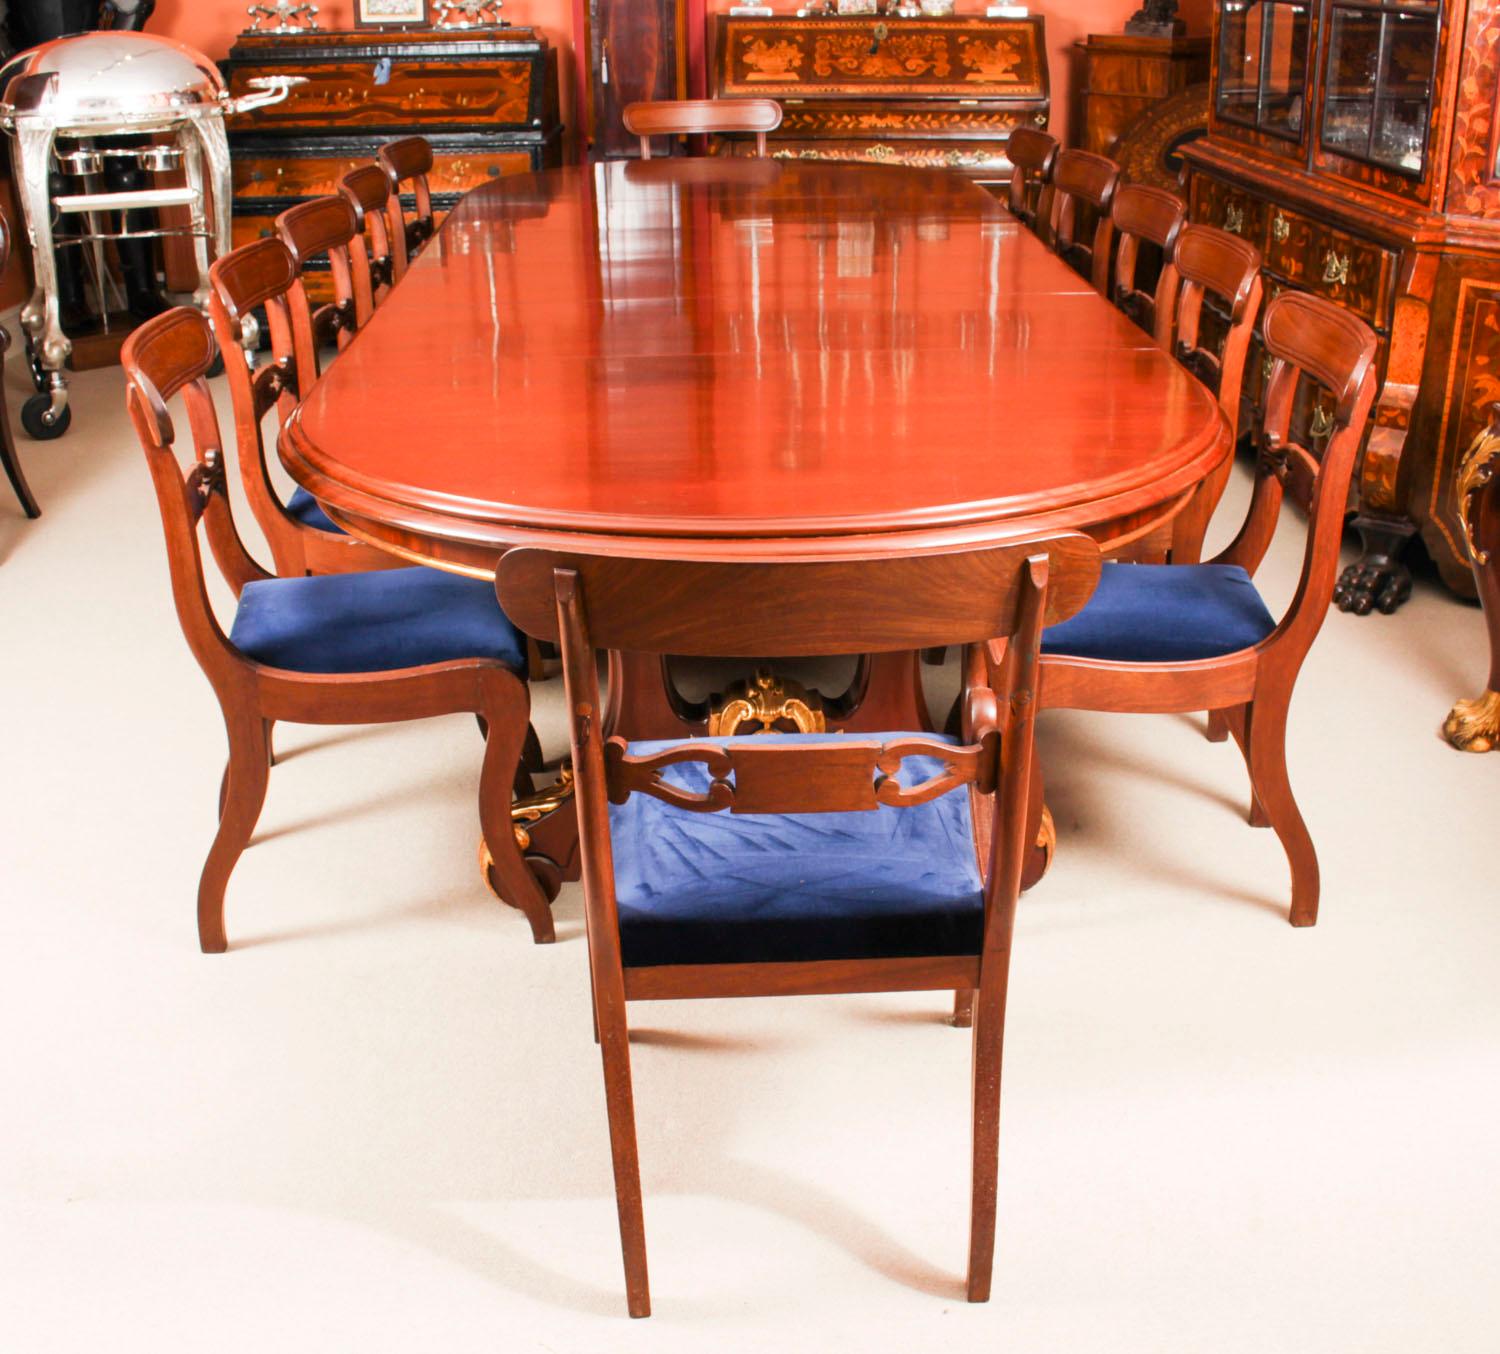 English Antique Victorian Mahogany Twin Base Dining Table & 12 Chairs, 19th Century